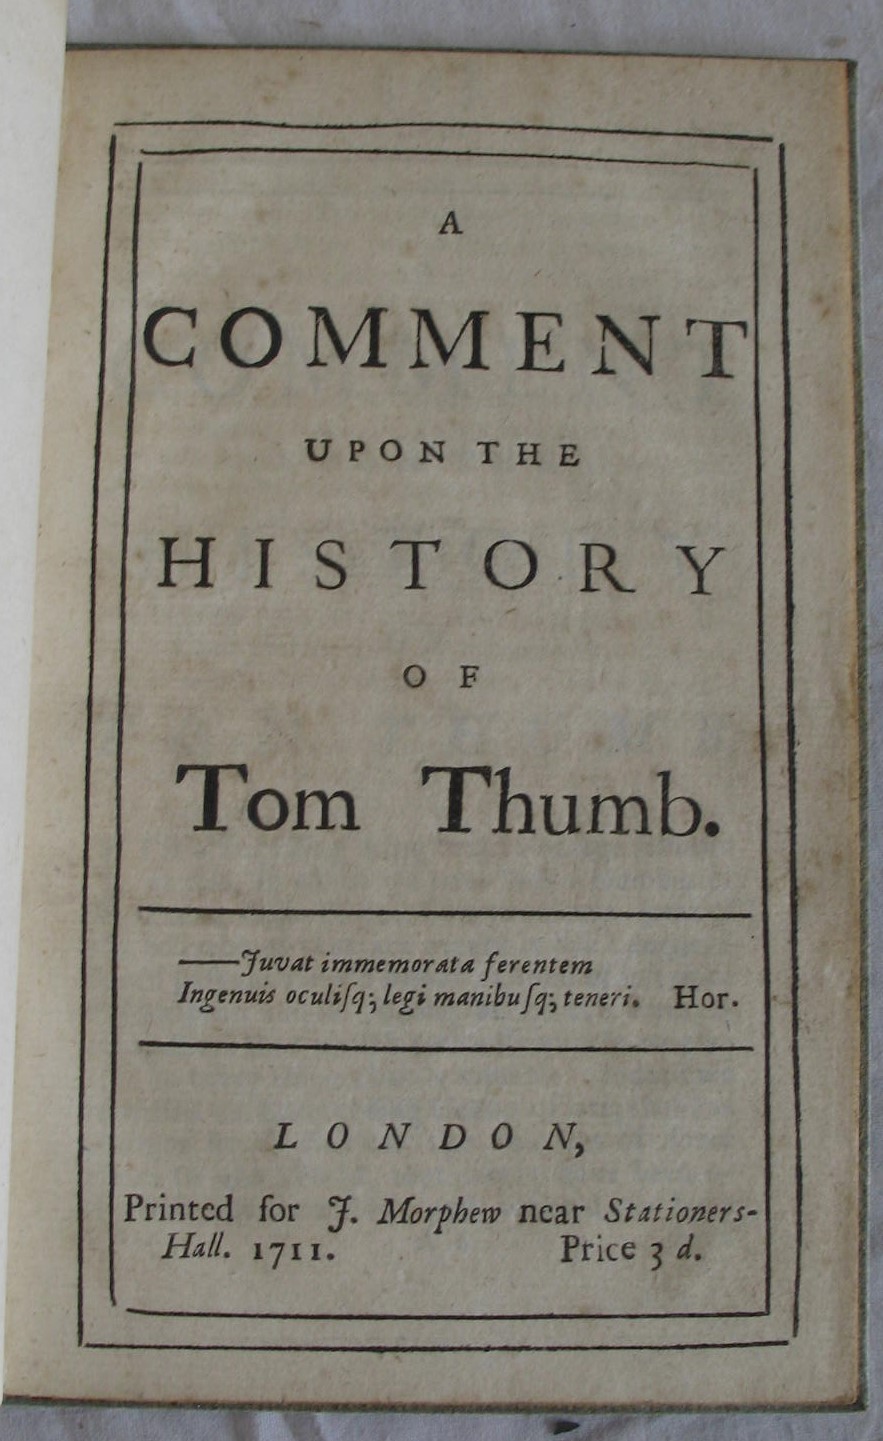 [WAGSTAFFE (William)] A Comment upon the History of Tom Thumb, sm. 8vo., 24 pp., 20th c. boards in